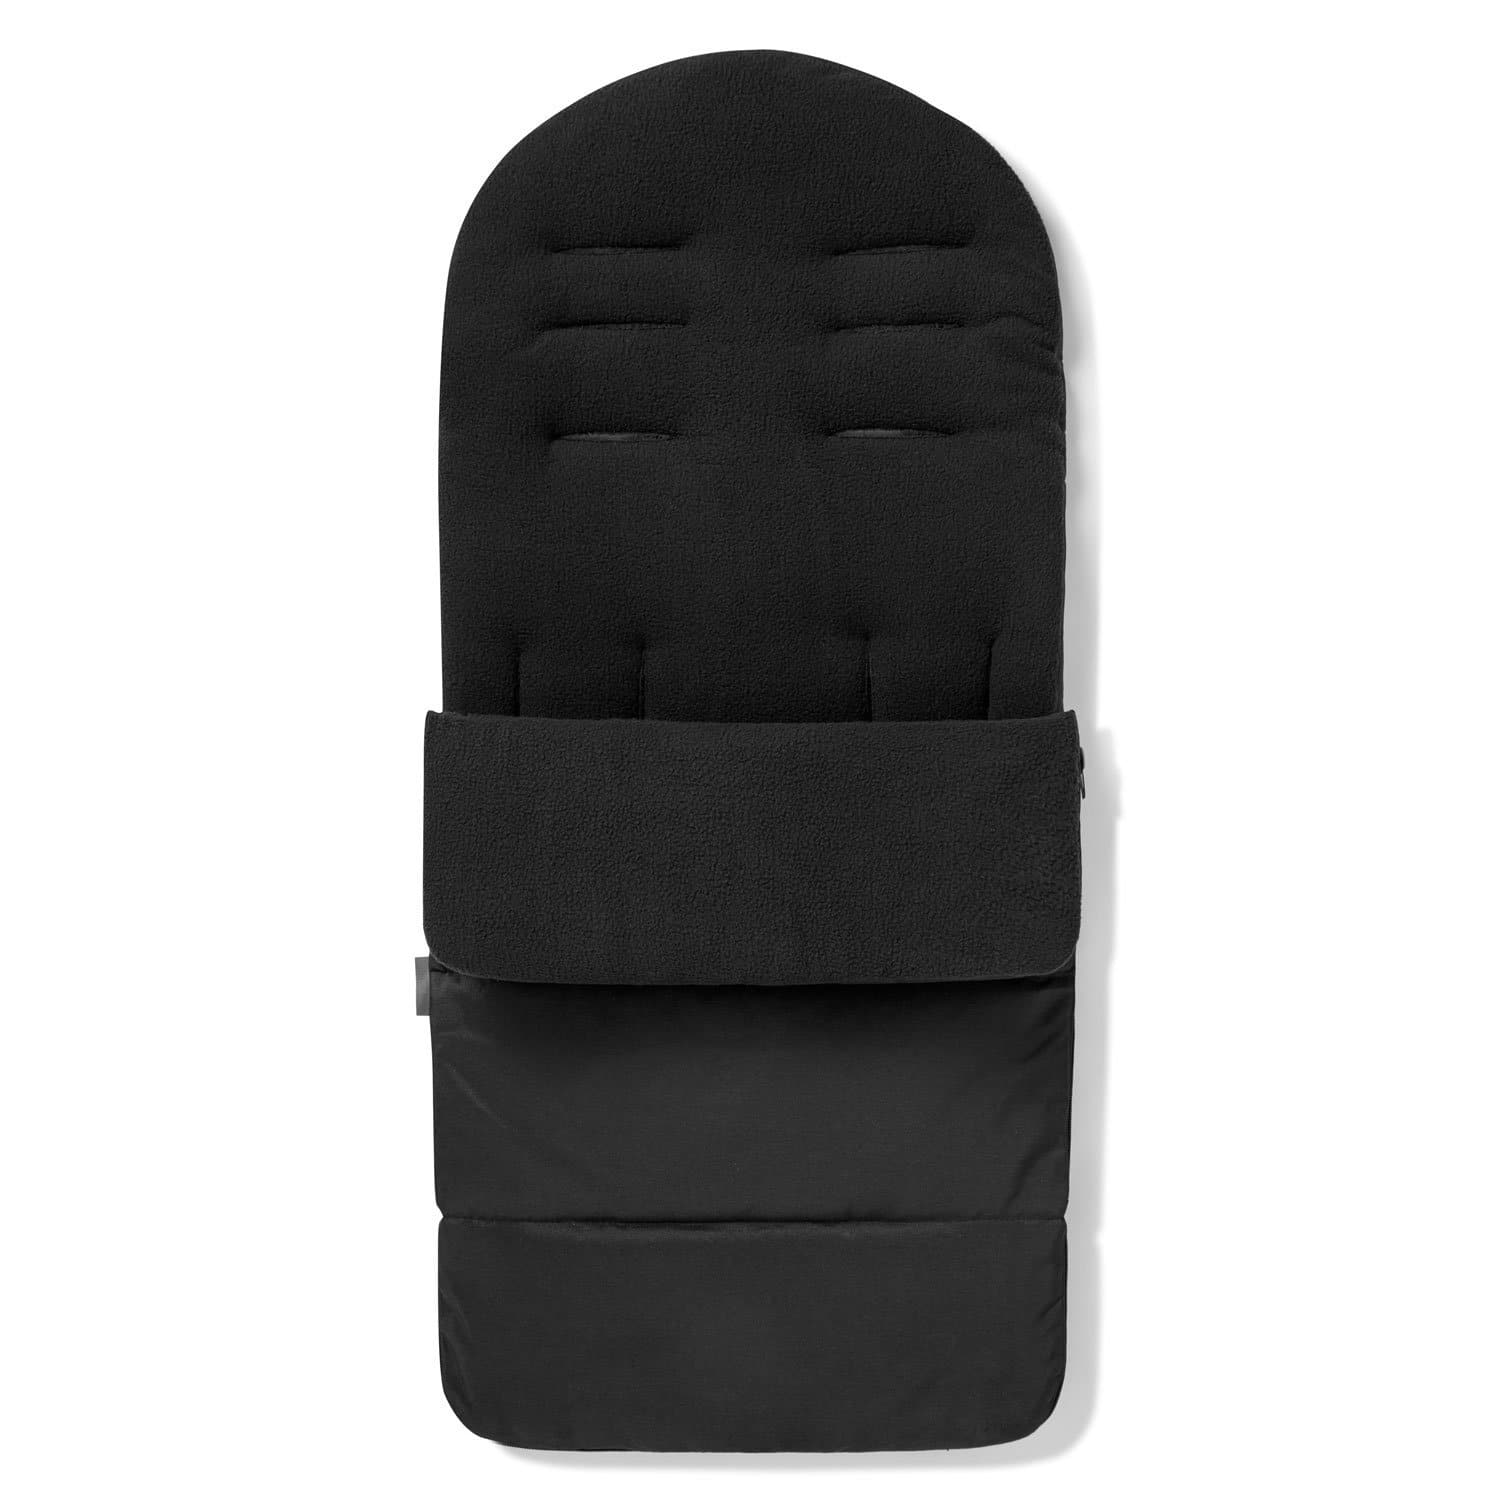 Premium Footmuff / Cosy Toes Compatible with Orbit Baby - Black Jack / Fits All Models | For Your Little One